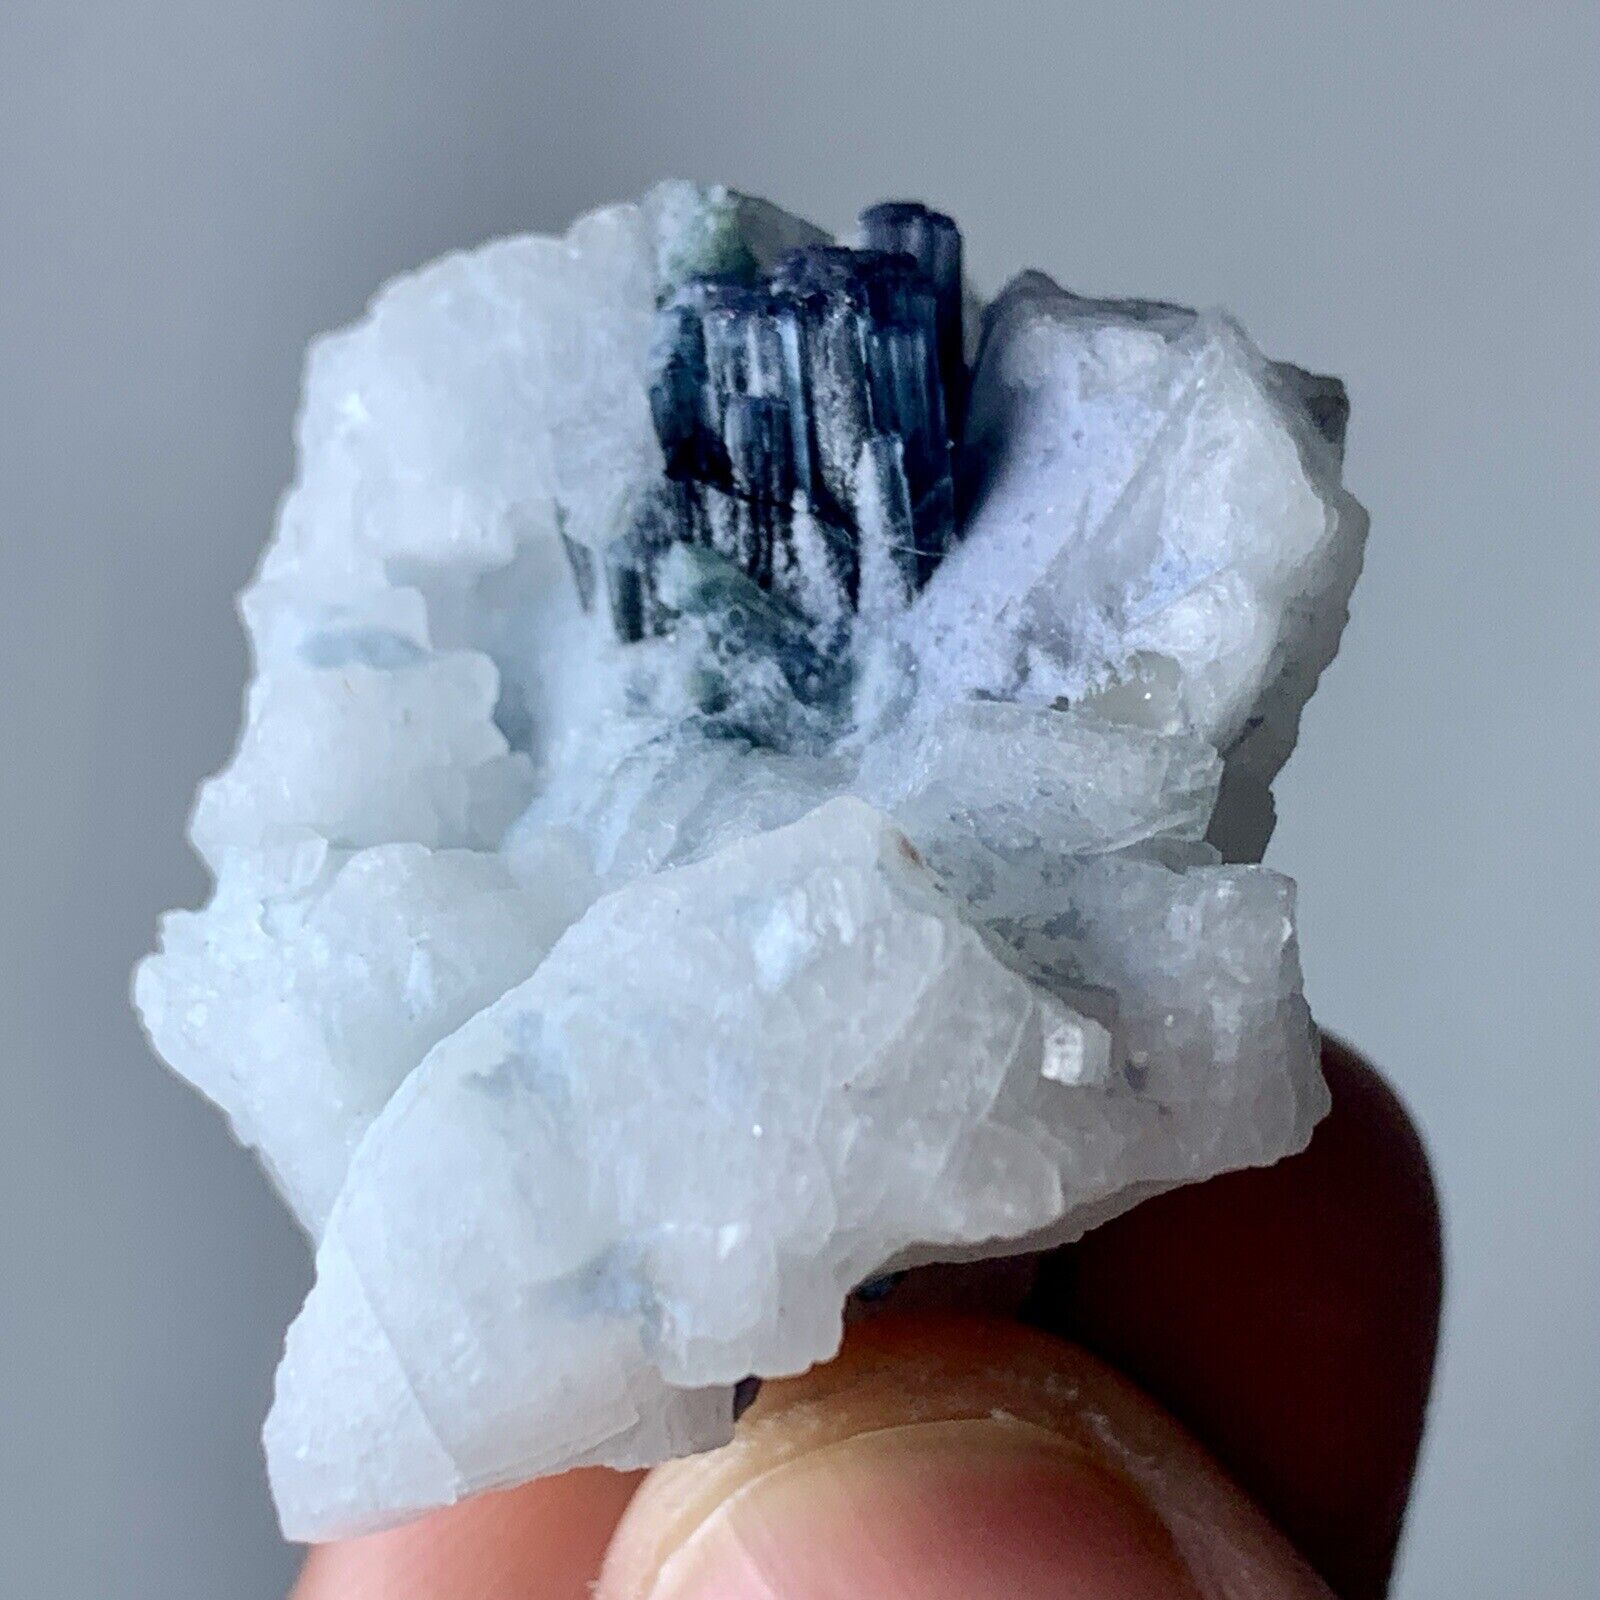 194 Carat Indicolite Colour Tourmaline Crystal With Specimen From Afghanistan